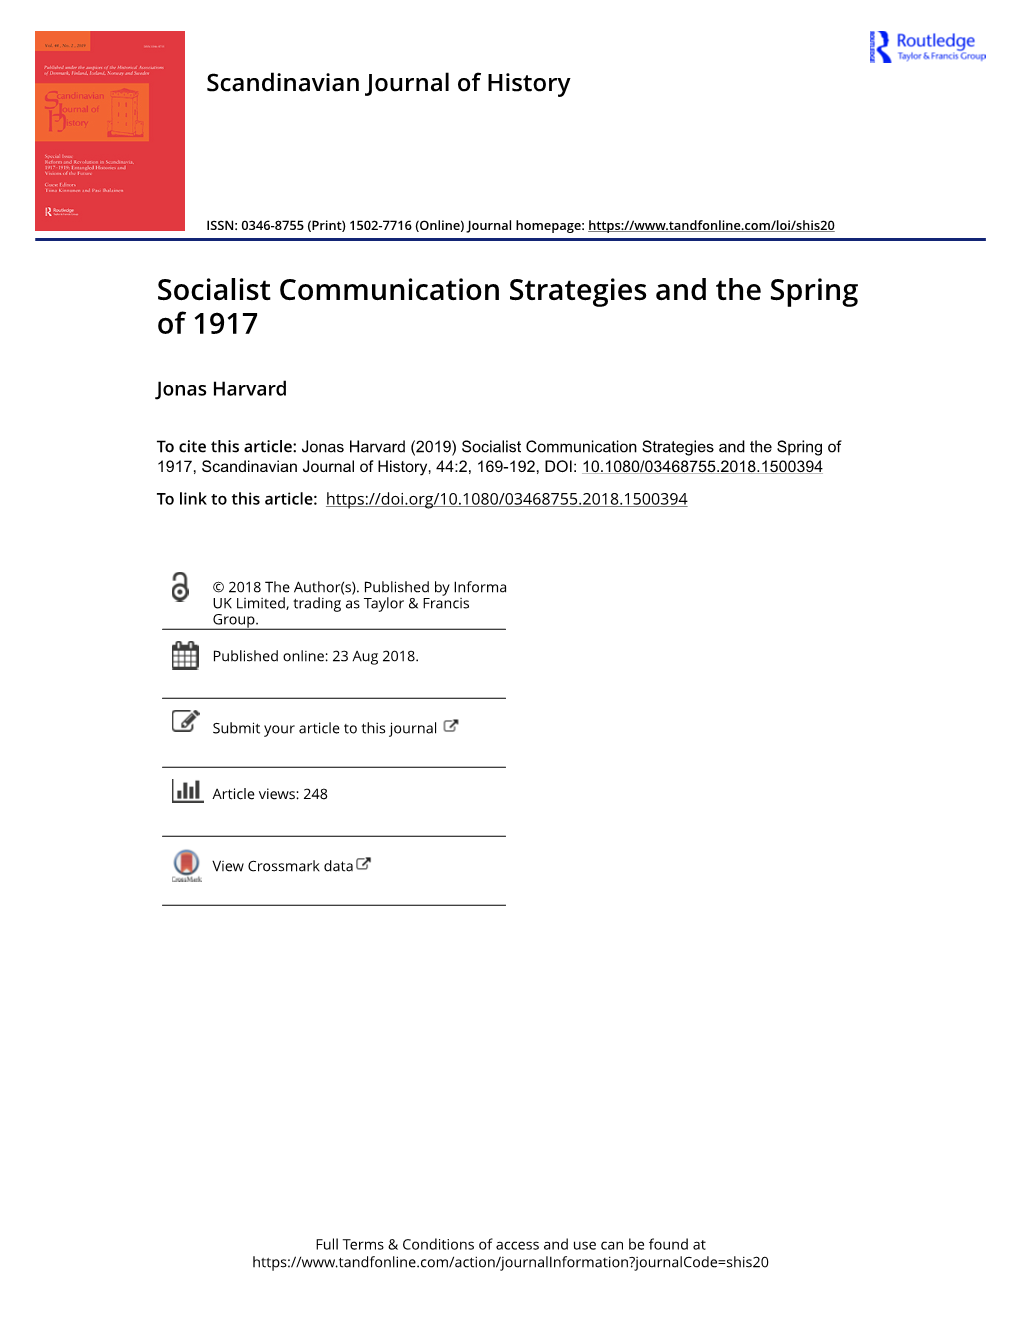 Socialist Communication Strategies and the Spring of 1917